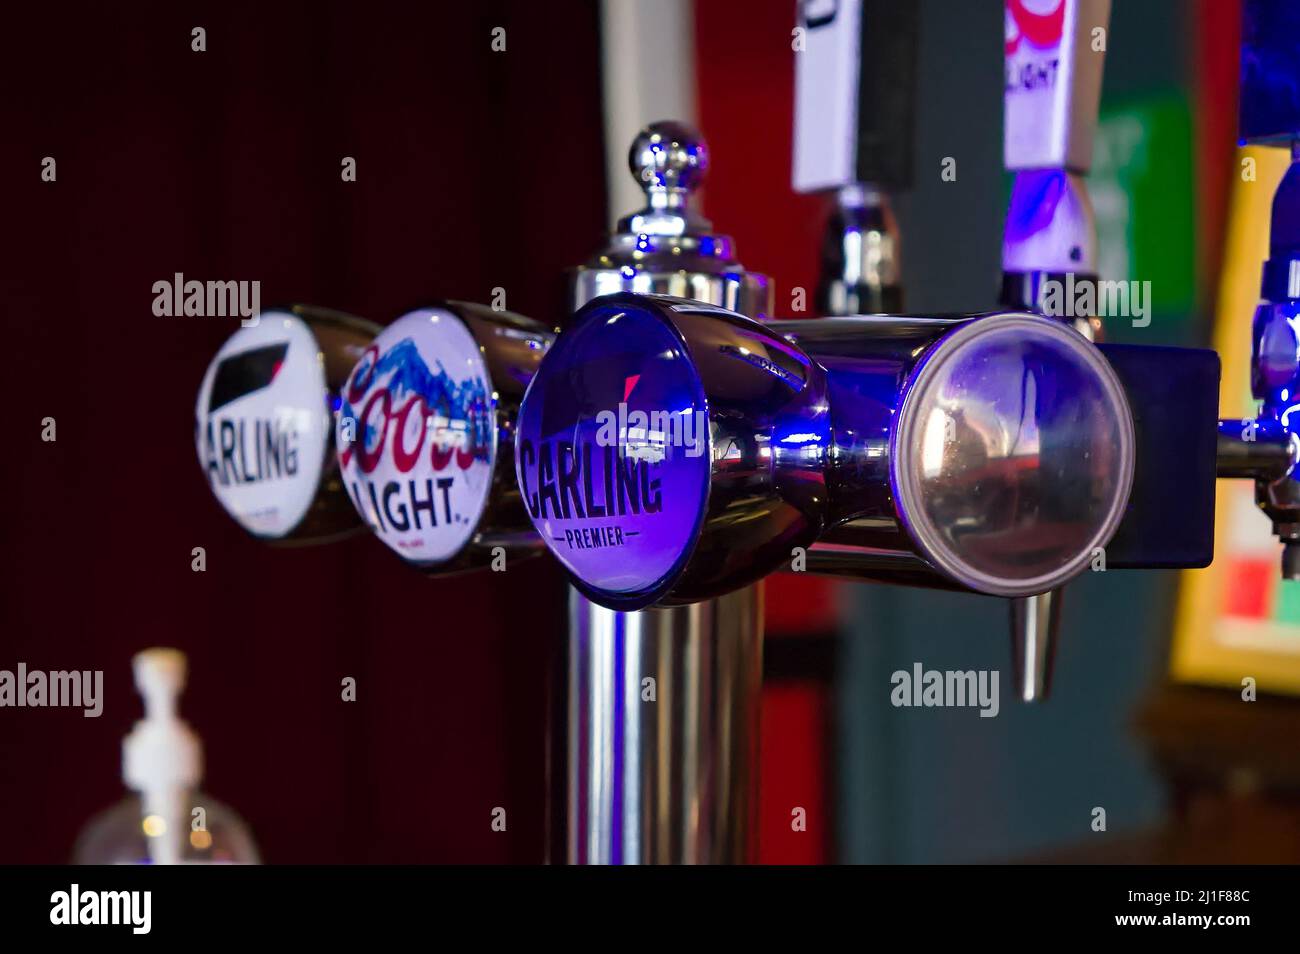 Beer brands displayed on the draught beer pumps in a UK pub with soft focus background Stock Photo